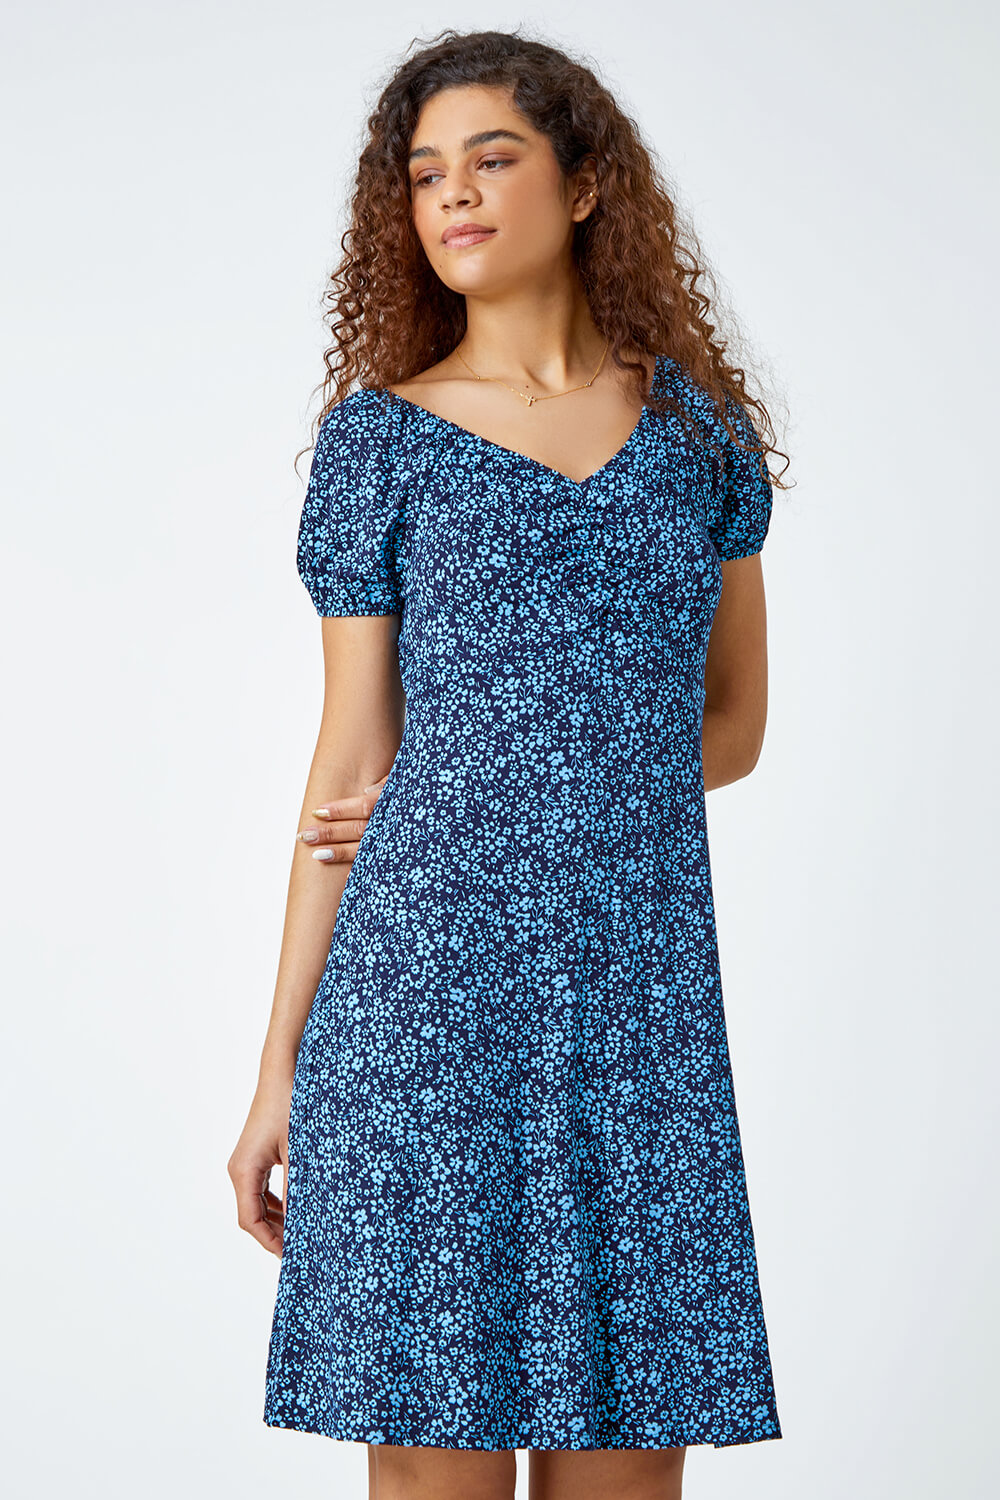 Blue Ditsy Floral Stretch Ruched Dress, Image 2 of 5